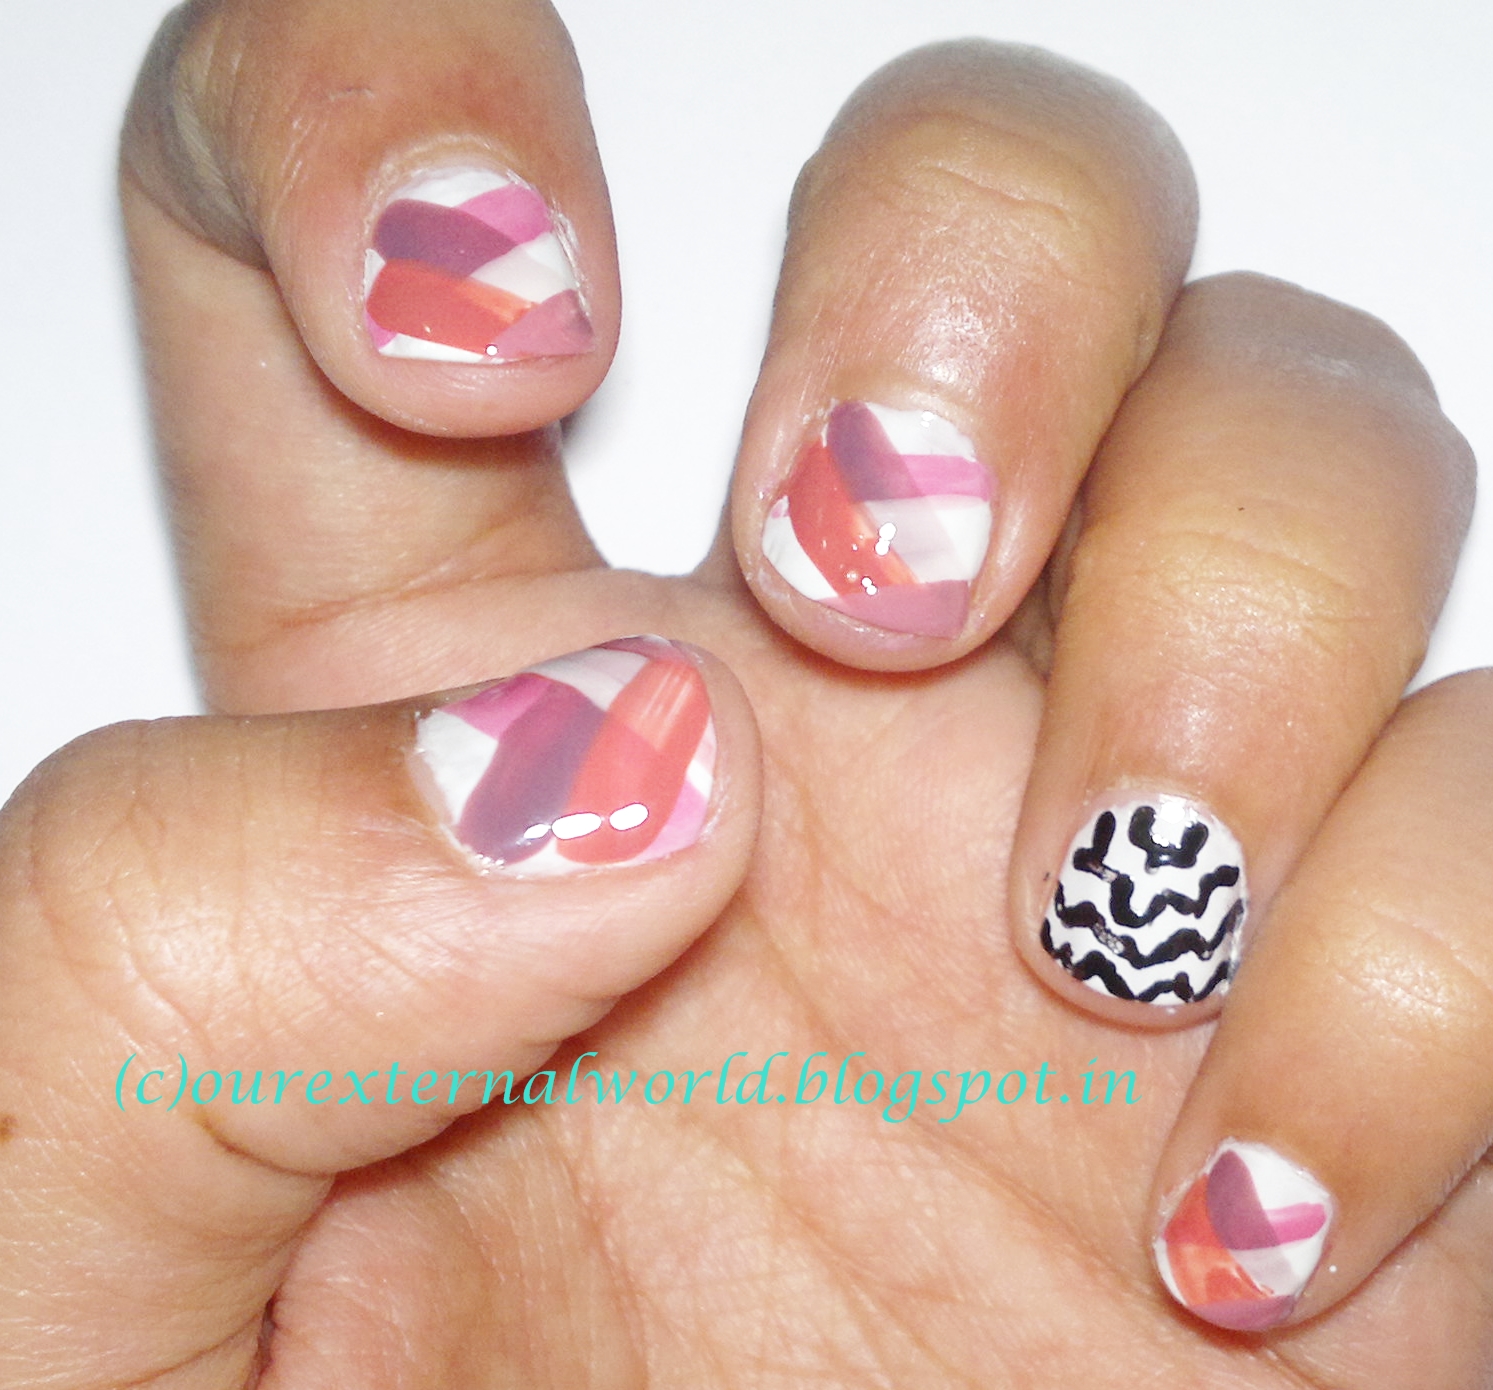 How to Do a Stripe Design with Tape | Nail Art Designs - YouTube